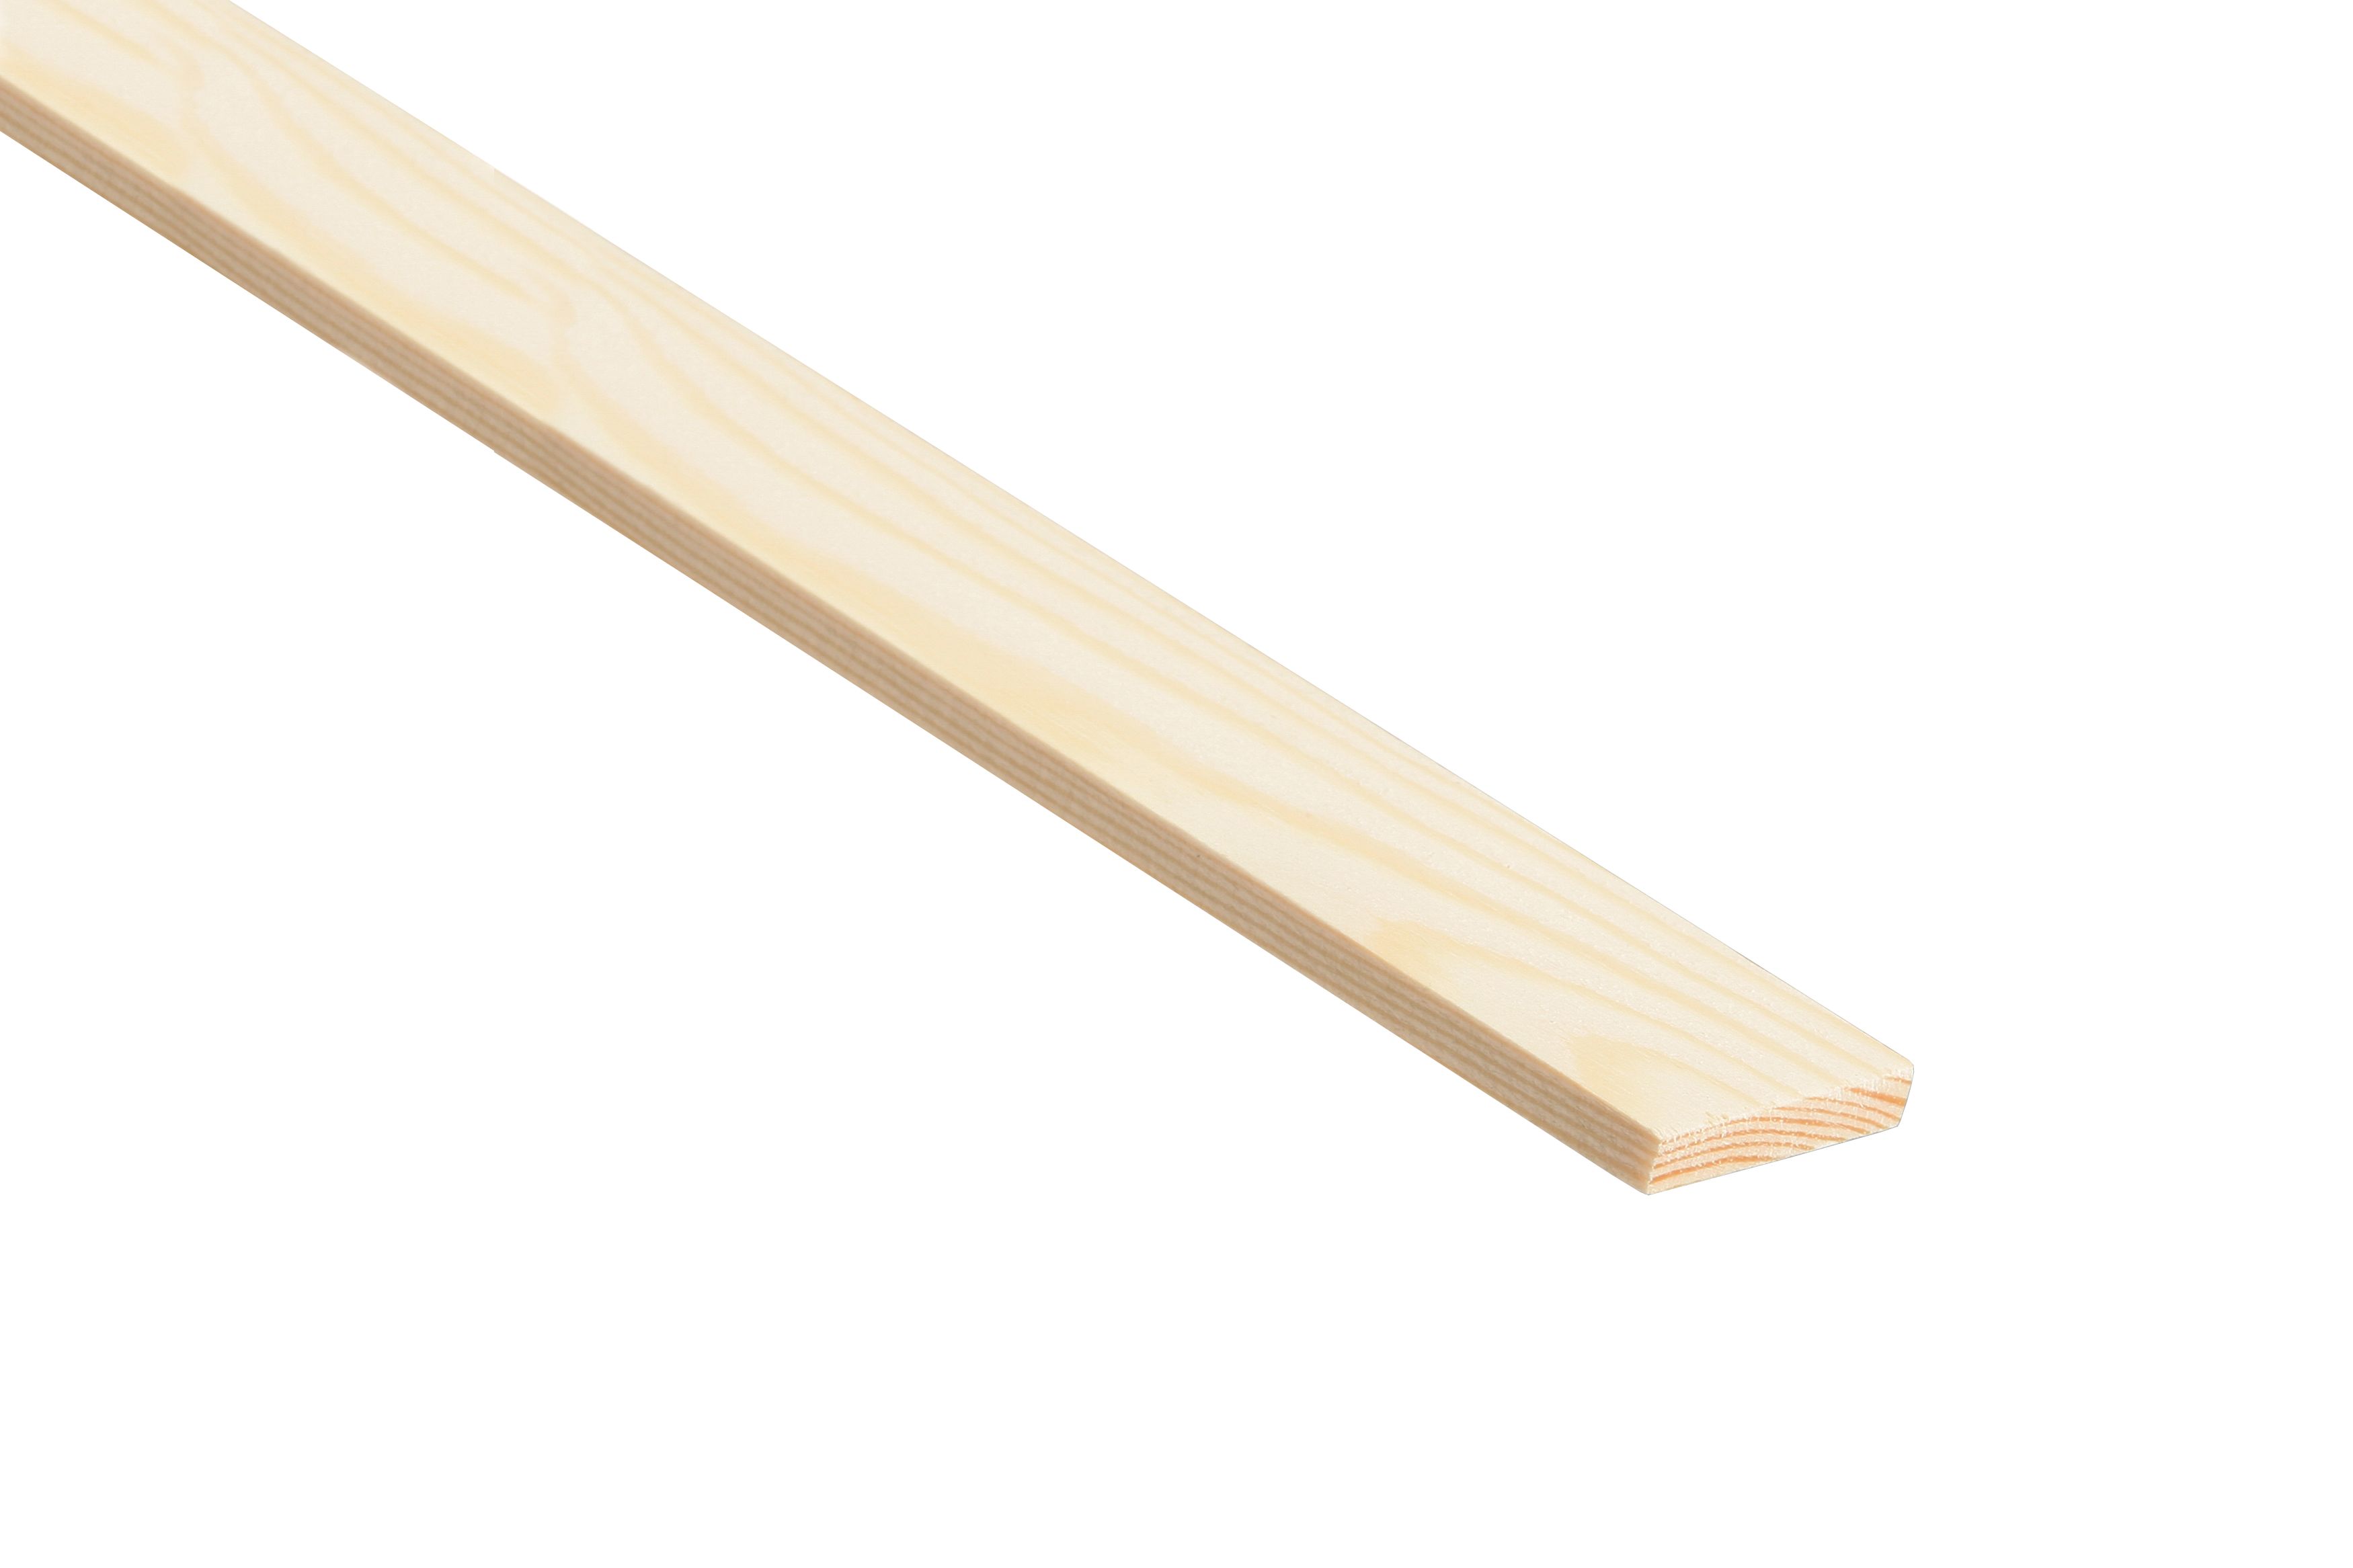 Image of Wickes Pine Stripwood Moulding (PSE) - 36 x 4 x 2400mm